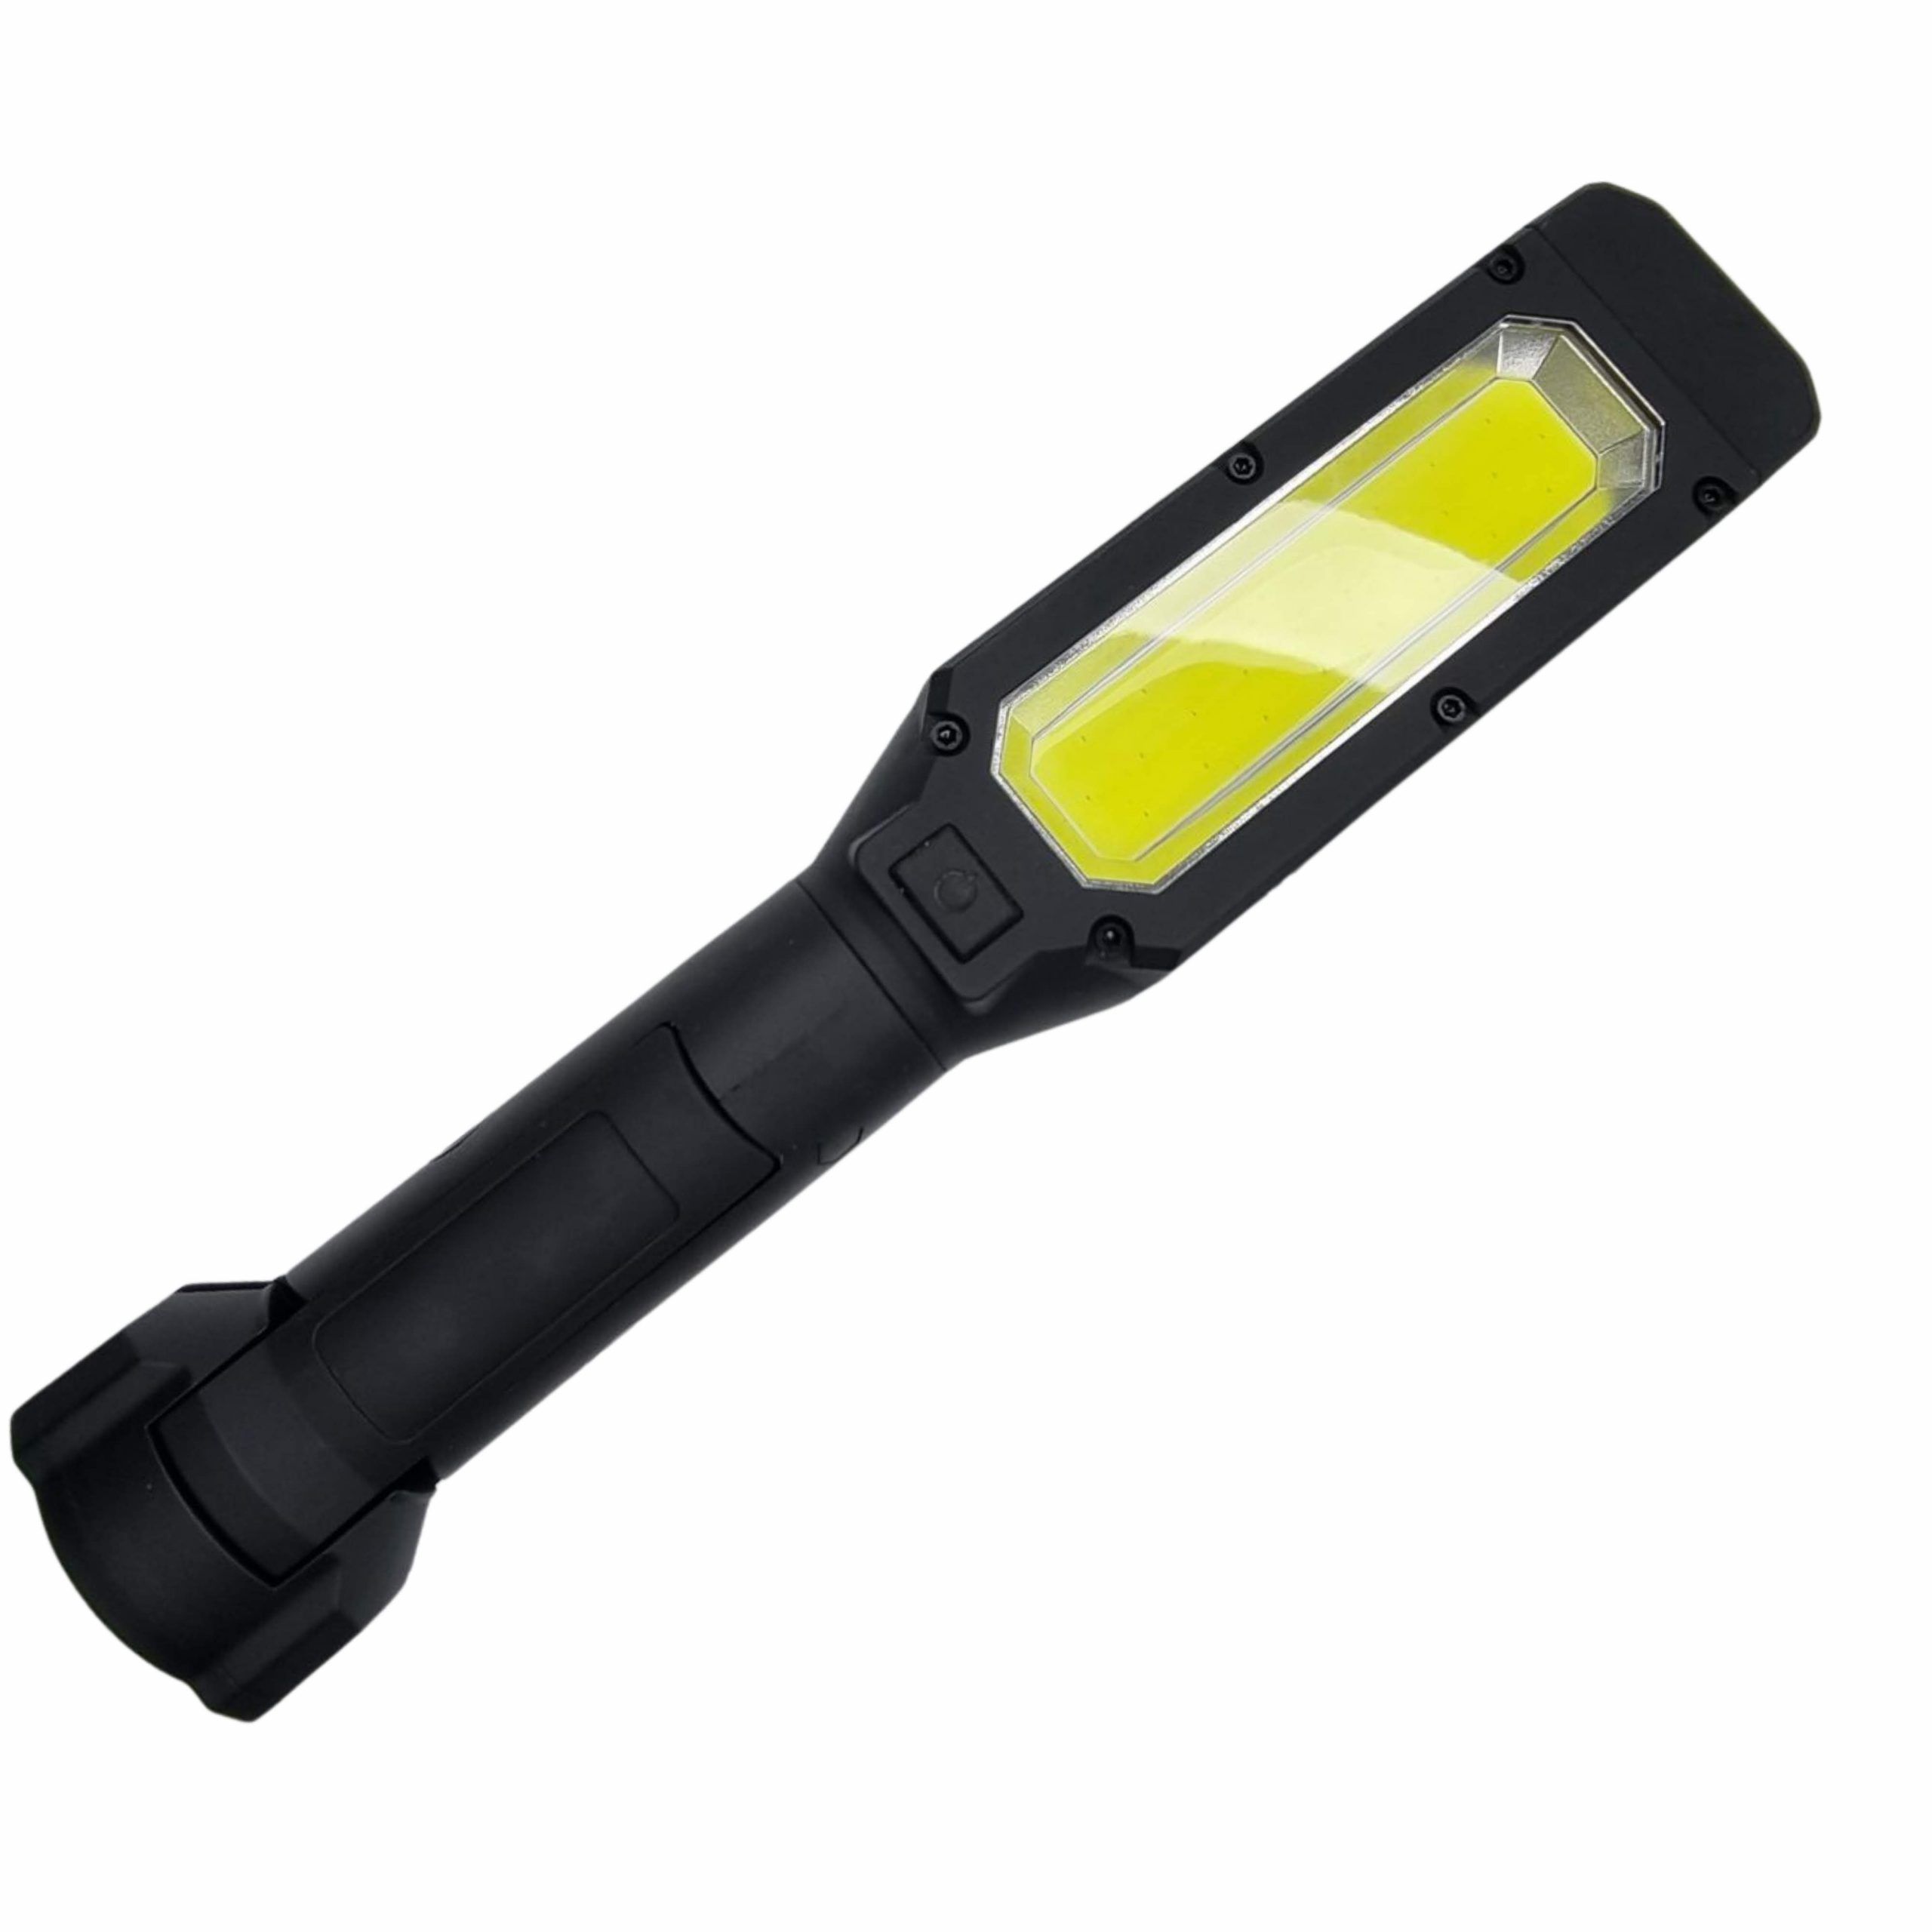 High stand - light with with - Worklamp adjustable and and Tools (61590) clamp warning rechargeable Power Rolson torch